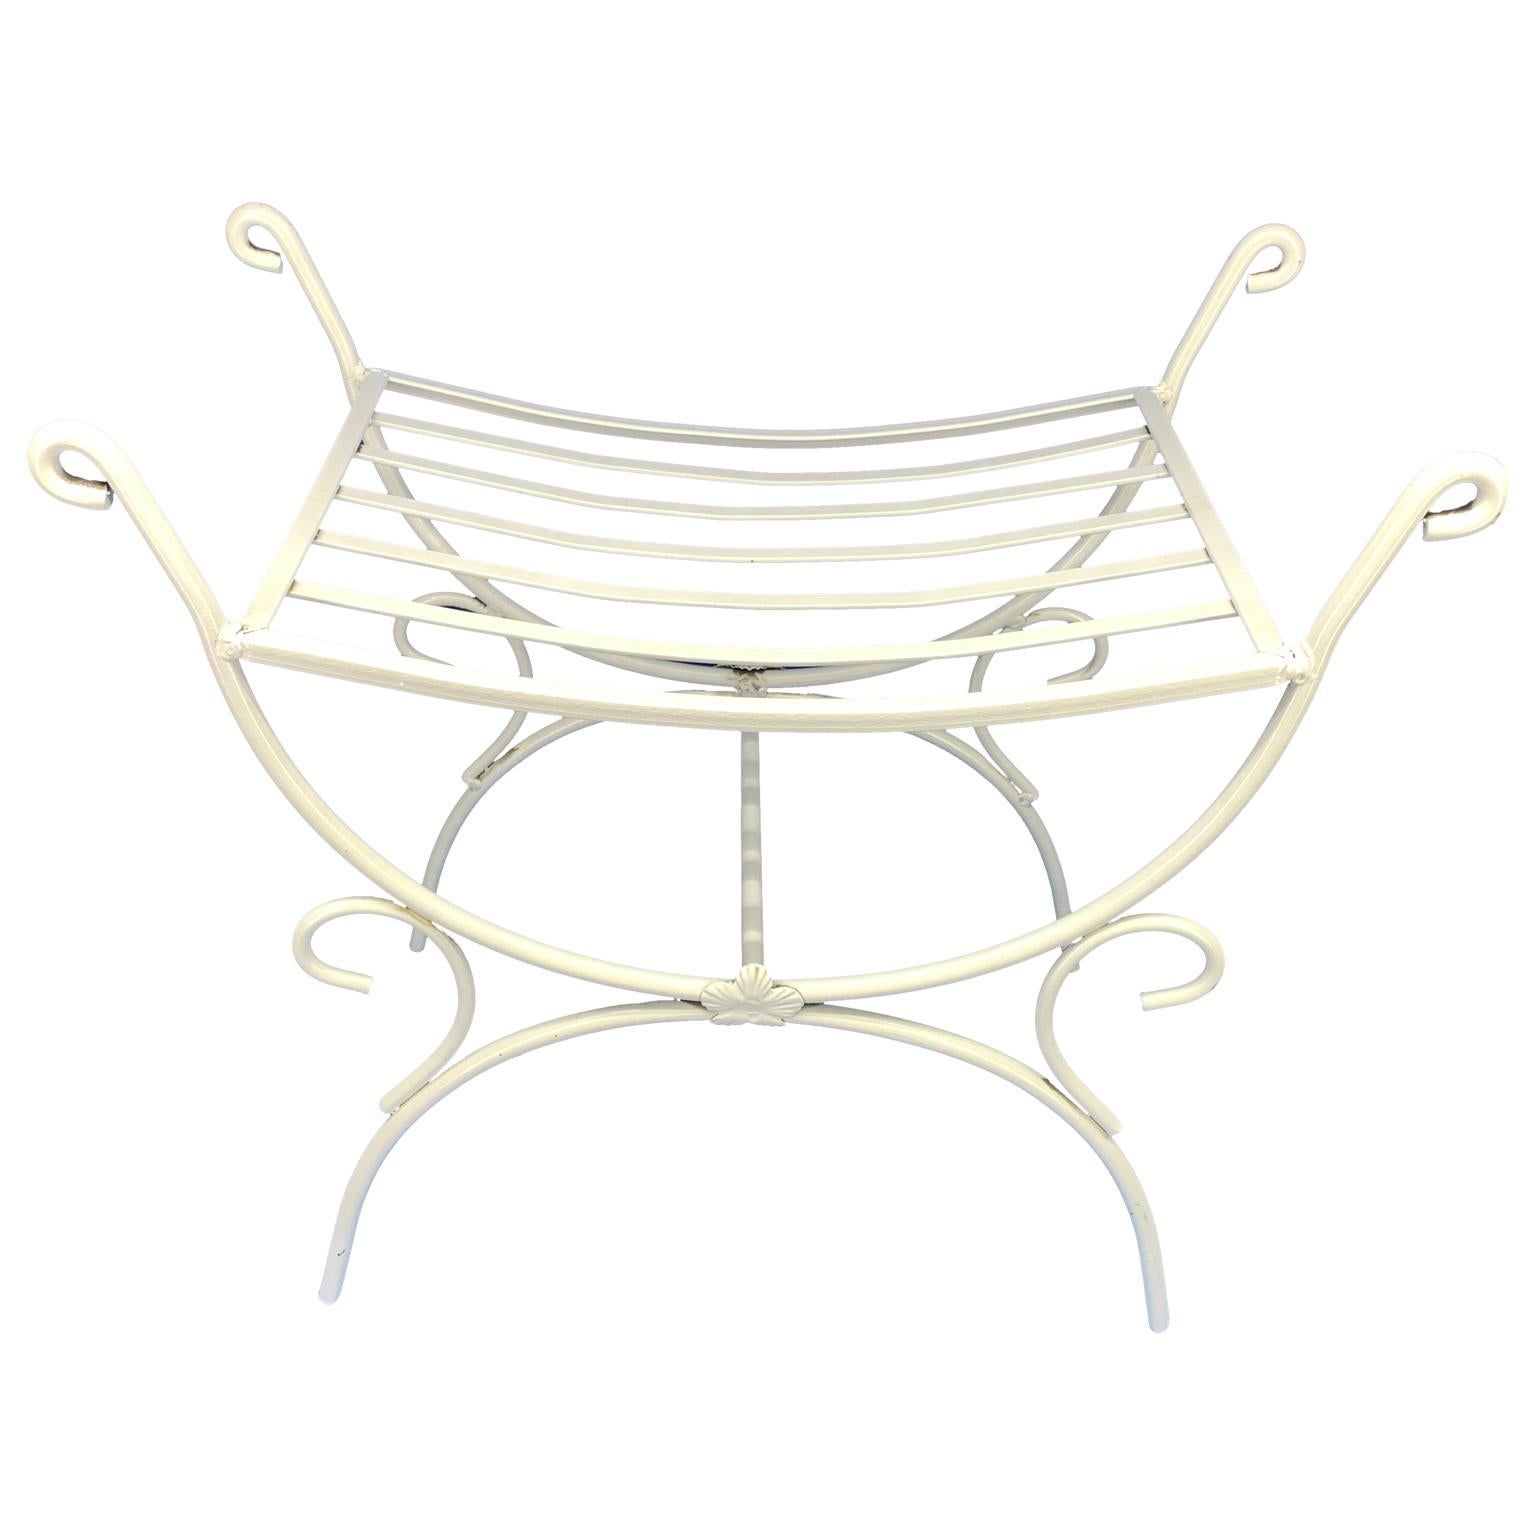 Modern White Powder-Coated Metal Stool Or Bench For Sale